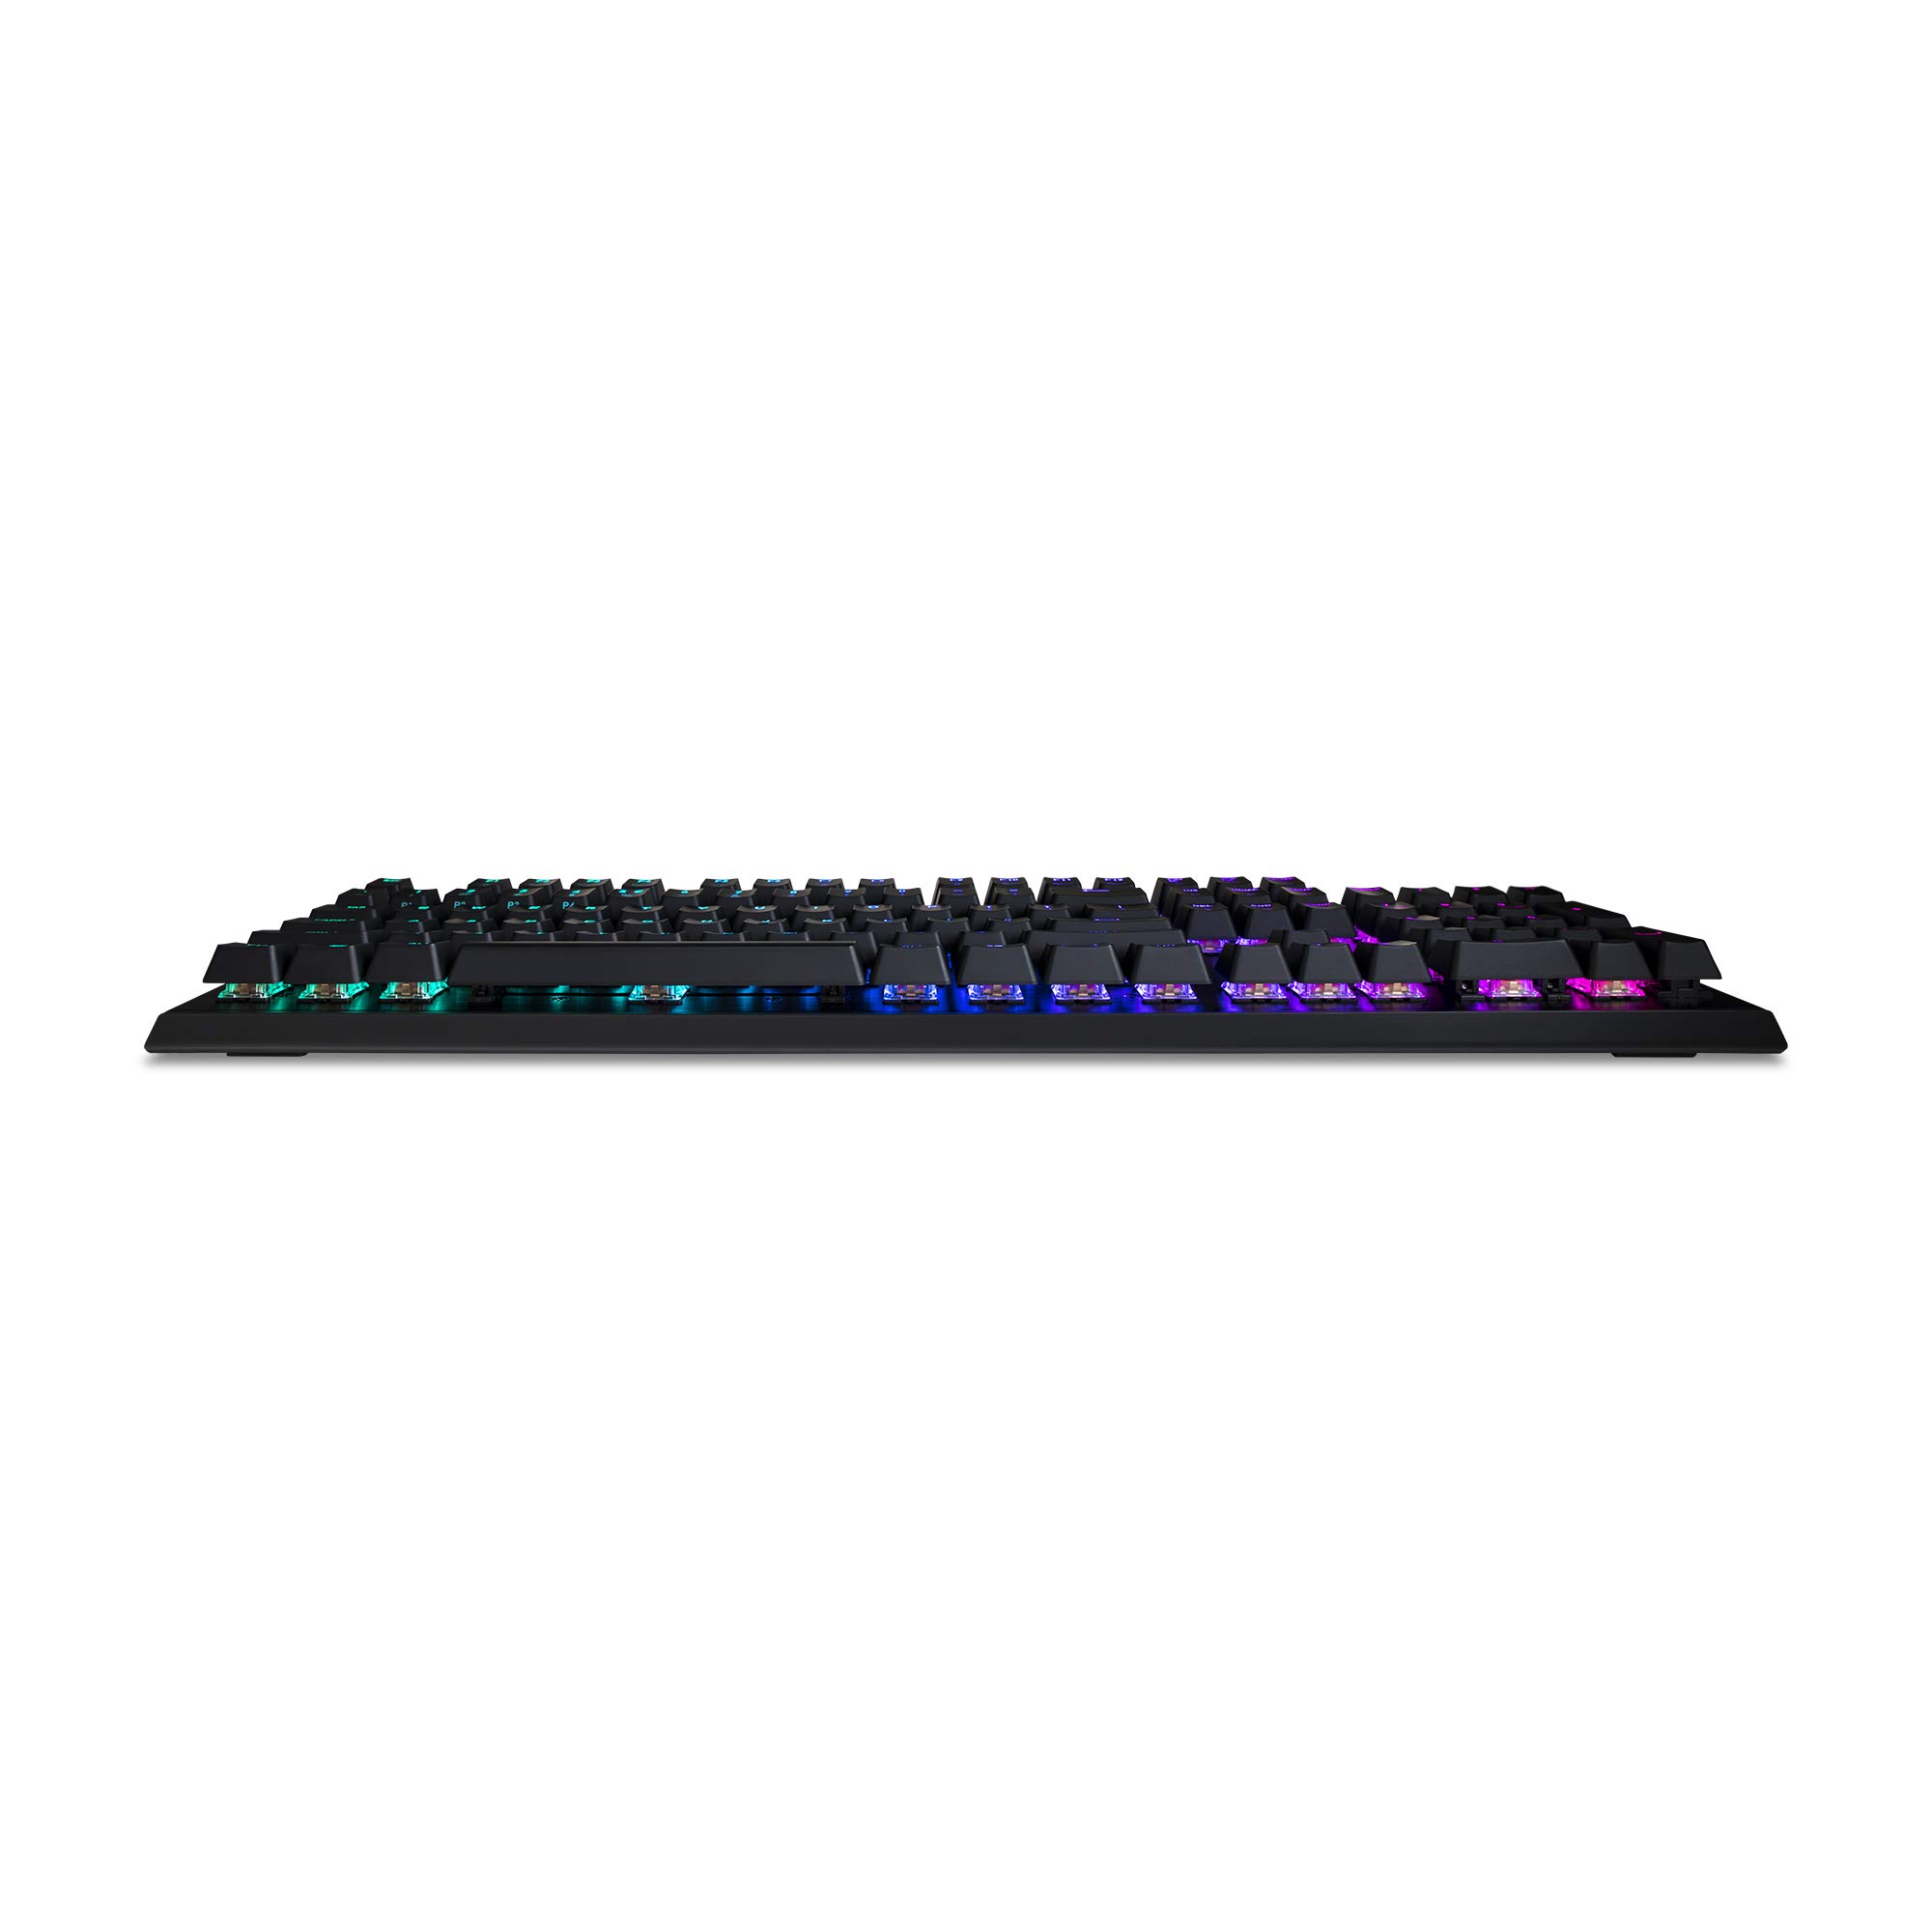 Cooler Master CK552 Full Mechanical Gaming PC Keyboard Gateron Linear Red, Switches, Customizable RGB Illumination, On-The-Fly Controls, Aluminum Top Plate, QWERTY (CK-552-KKGR1-US)